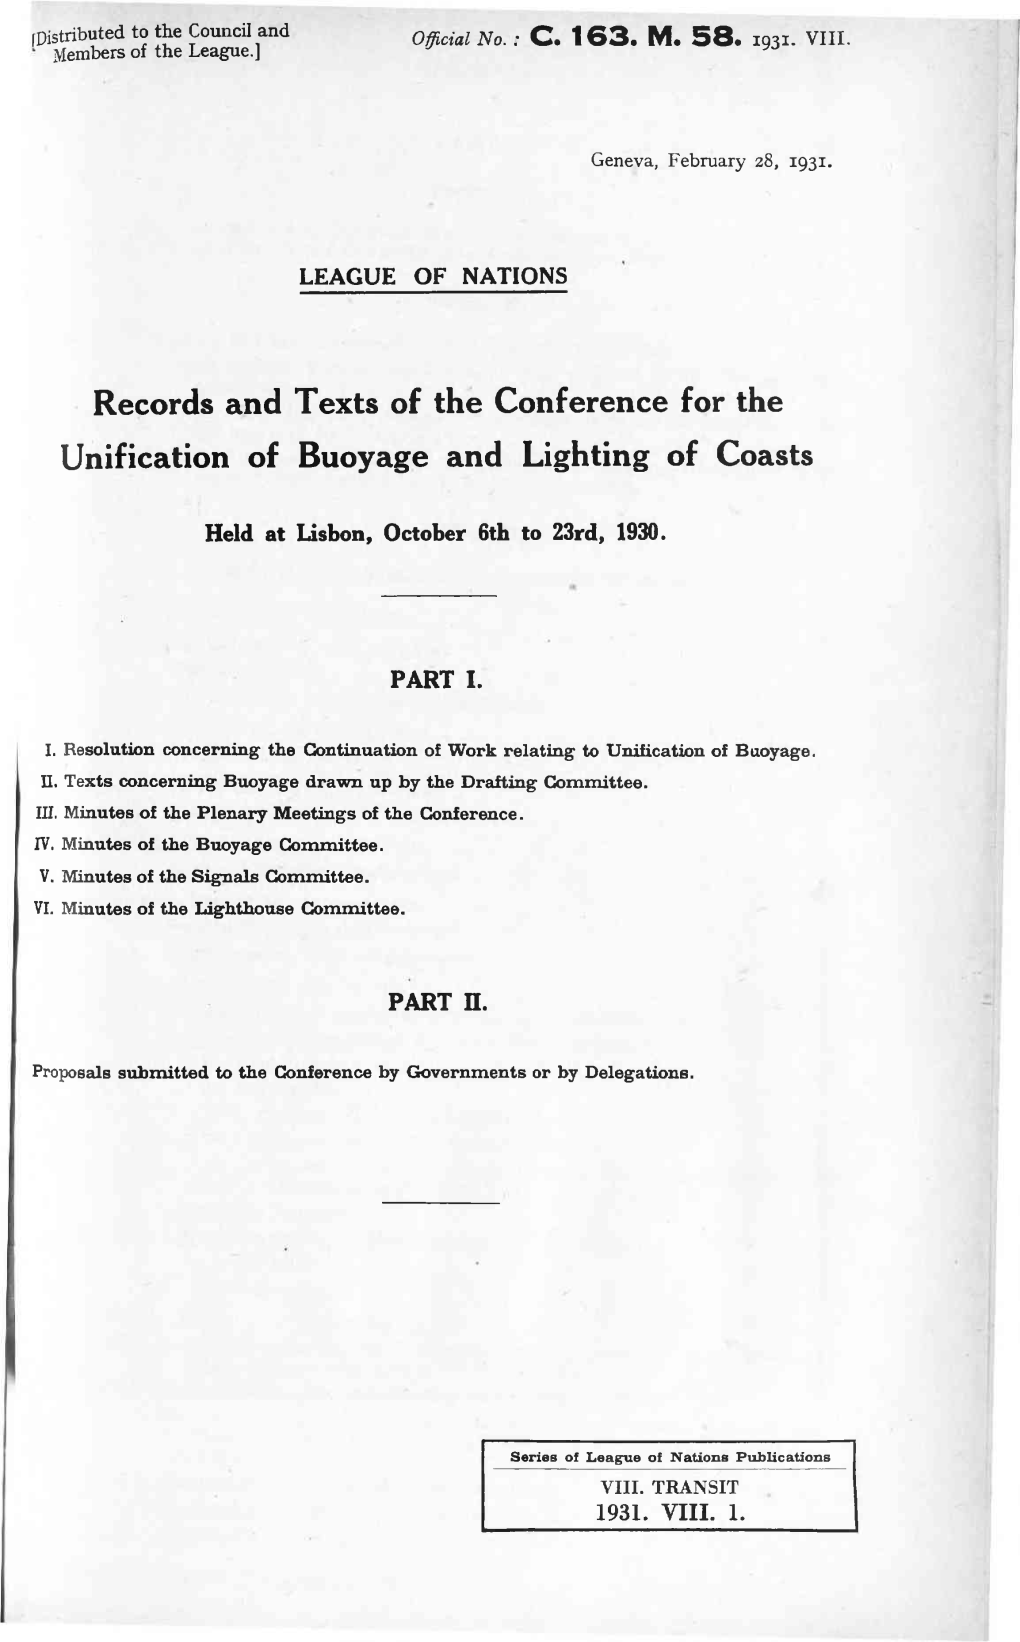 Records and Texts of the Conference for the Unification of Buoyage and Lighting of Coasts